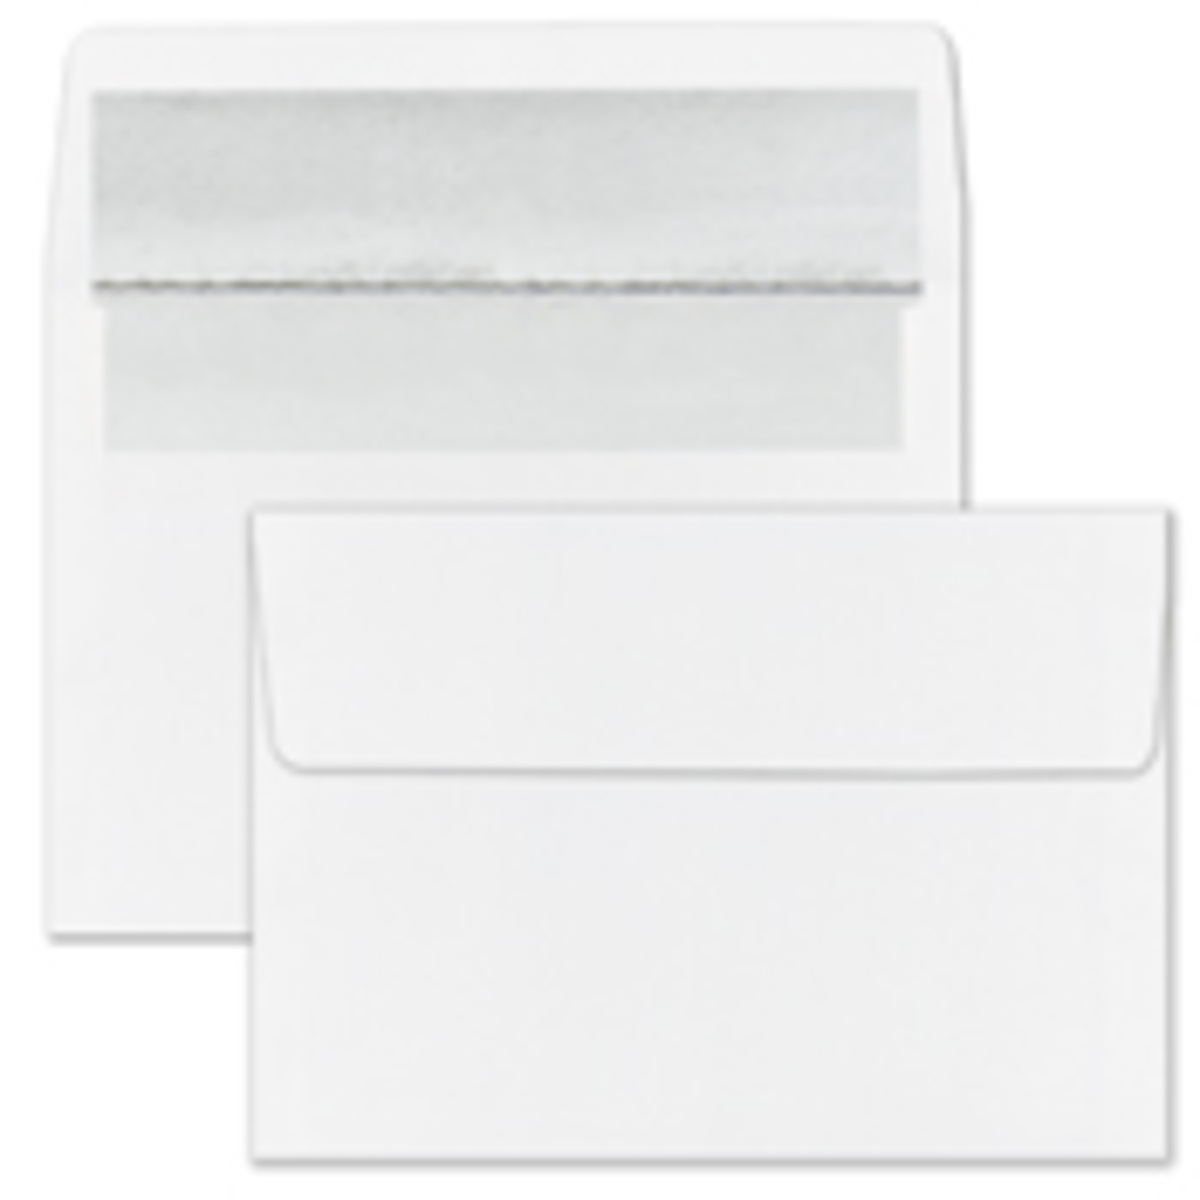 Recycled Shiny Silver Foil Lined White Envelope - Blank